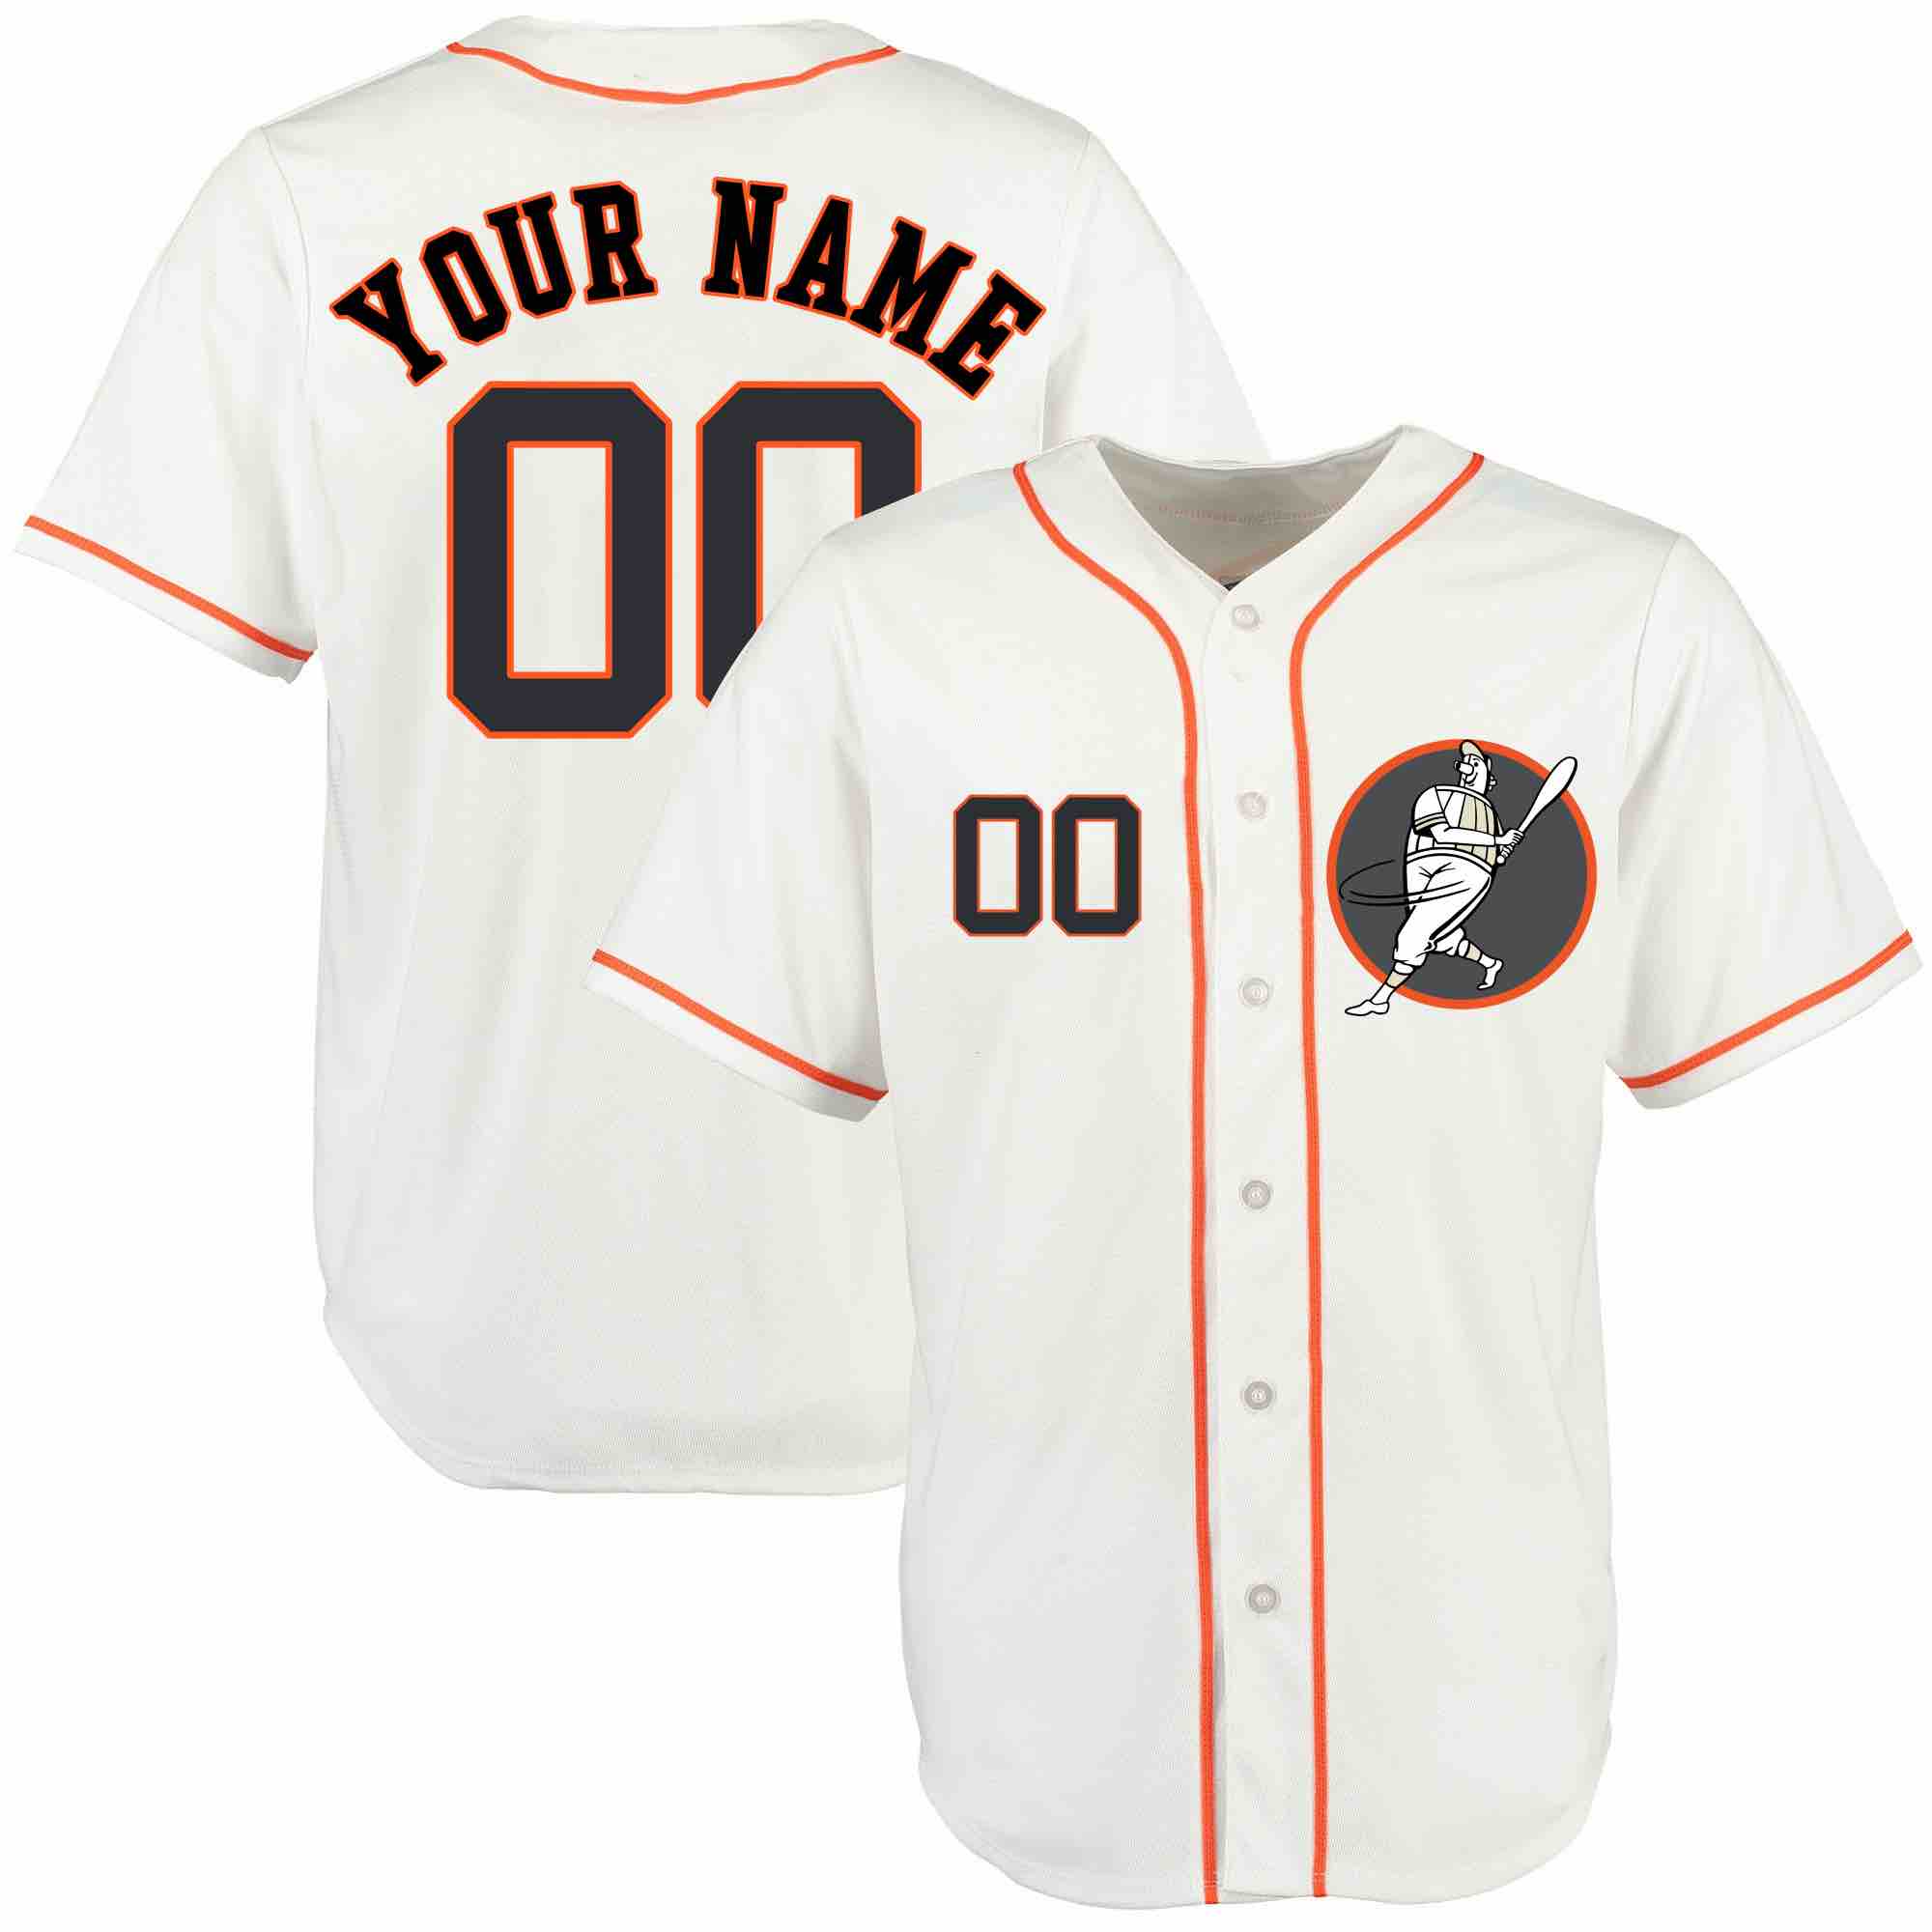 MLB Houston Astros Personalized White Color Jersey